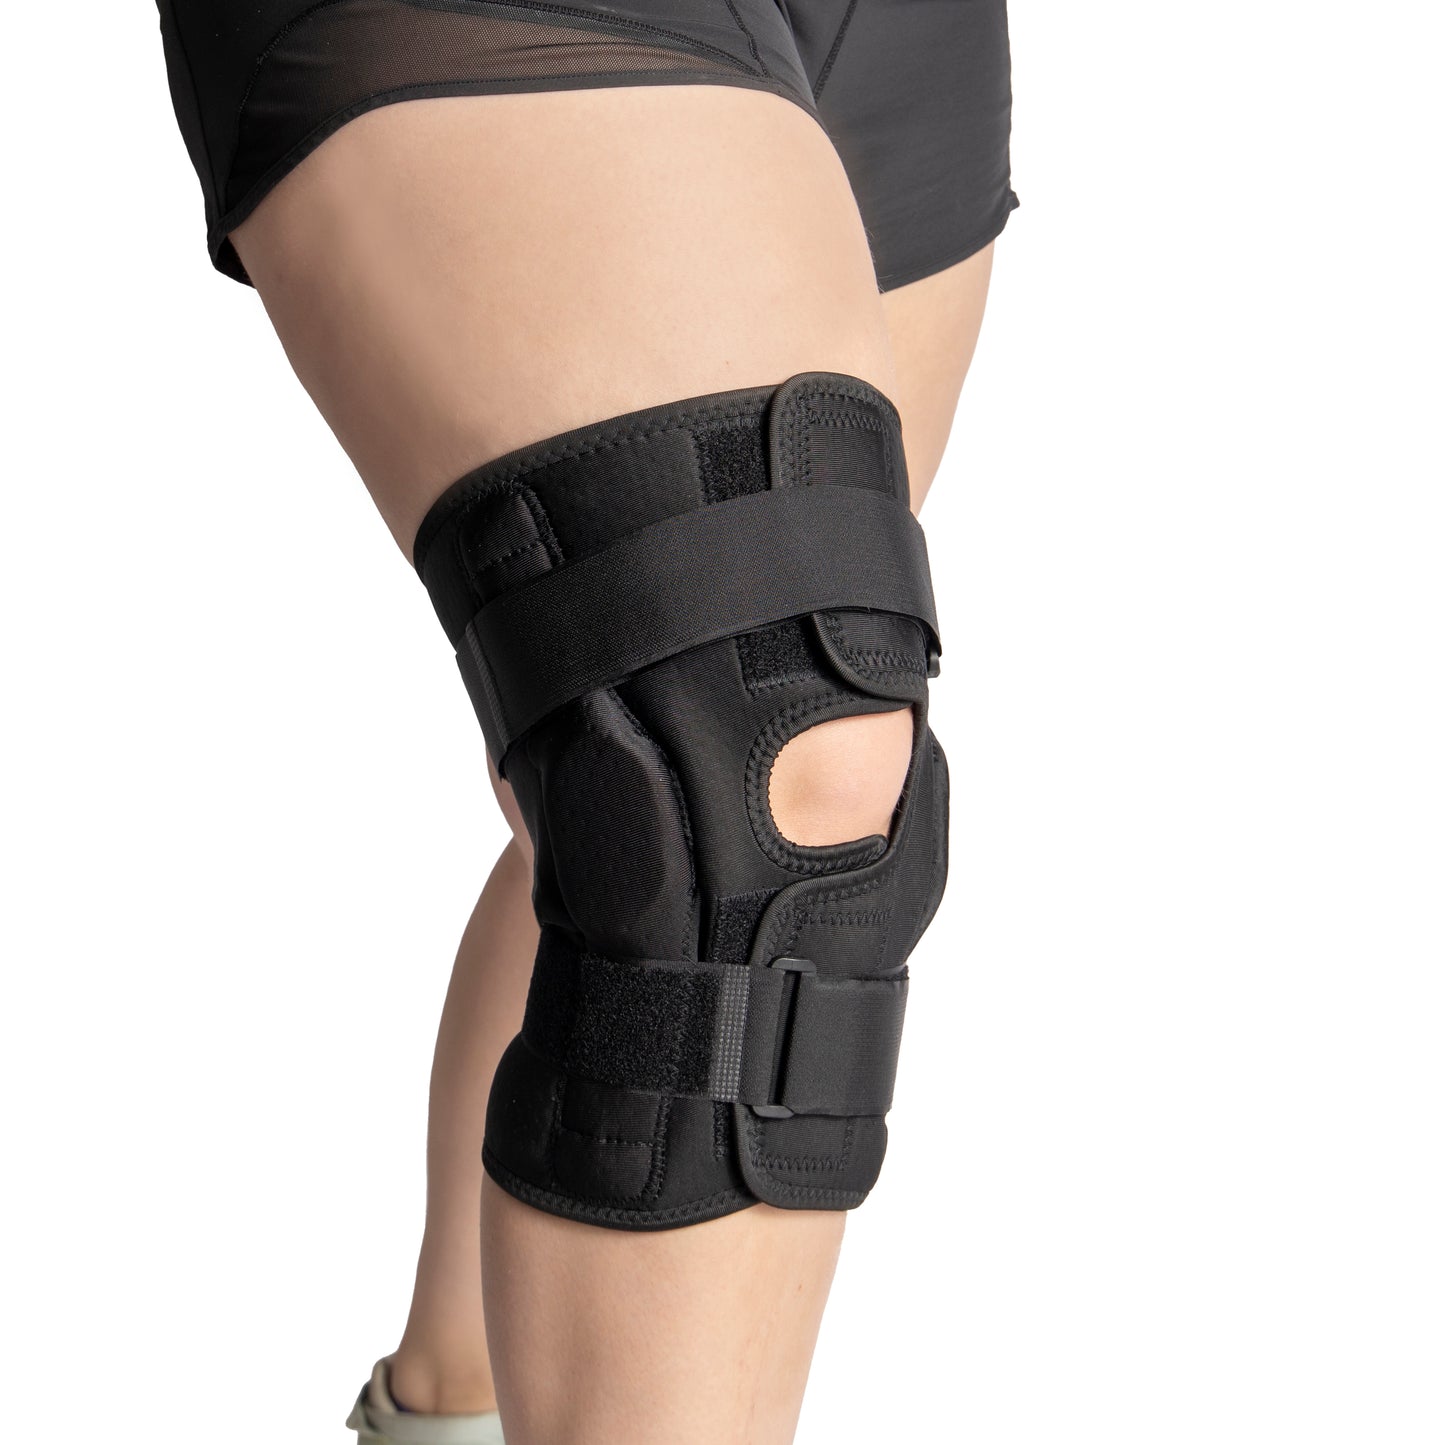 Brace Direct Obese ROM Knee Brace for Plus Size